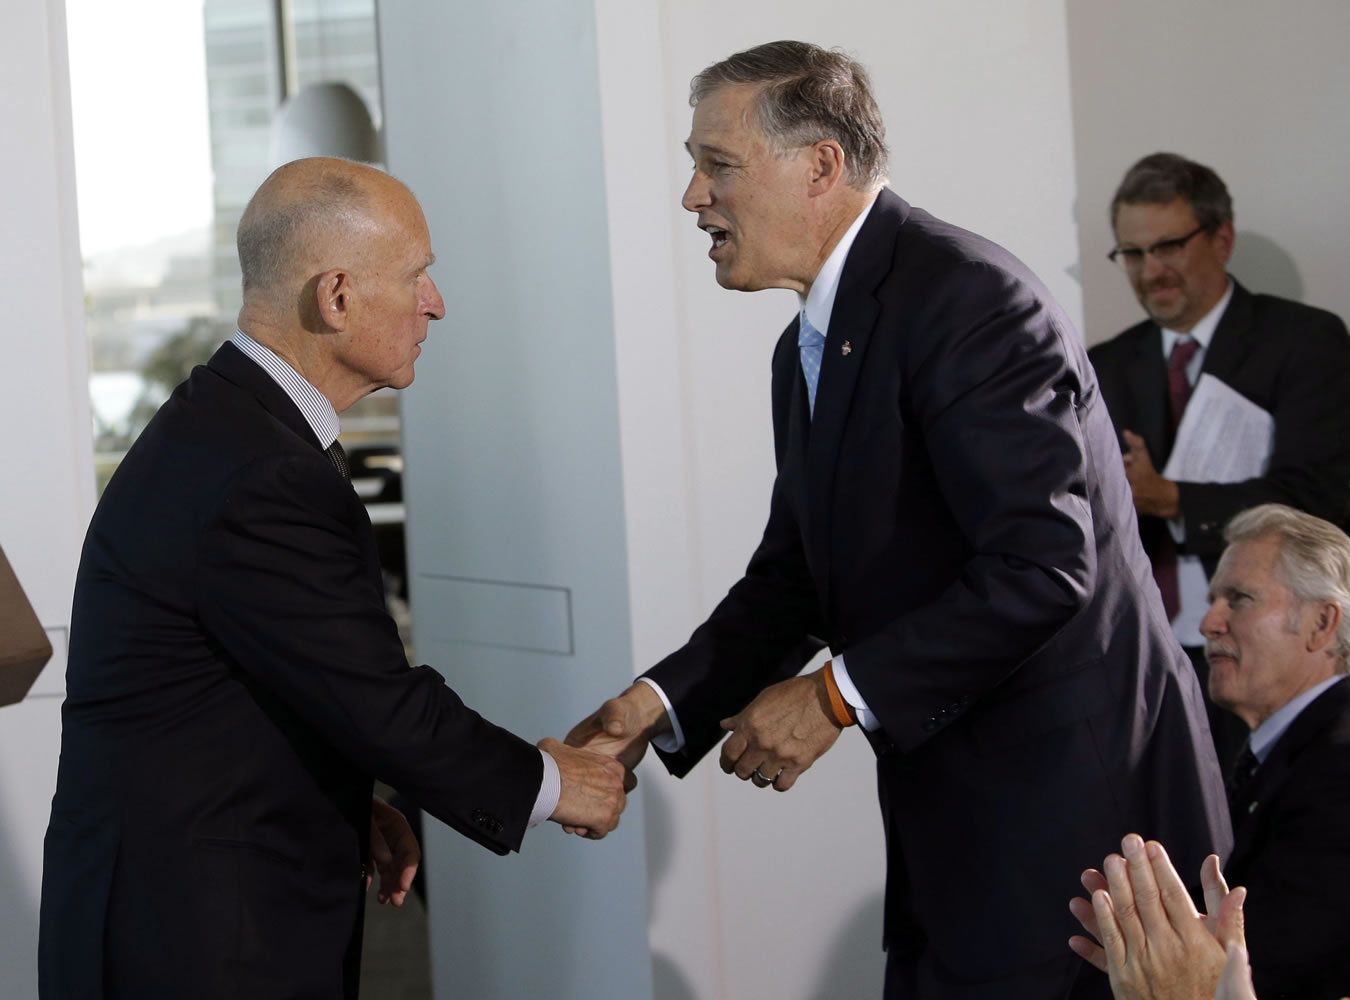 Washington Gov. Jay Inslee, right, shake hands with California Gov. Jerry Brown before they signed an agreement with Oregon Gov. John Kitzhaber and Mary Polak, a representative of the premier of British Columbia, to collectively combat climate change on Oct.